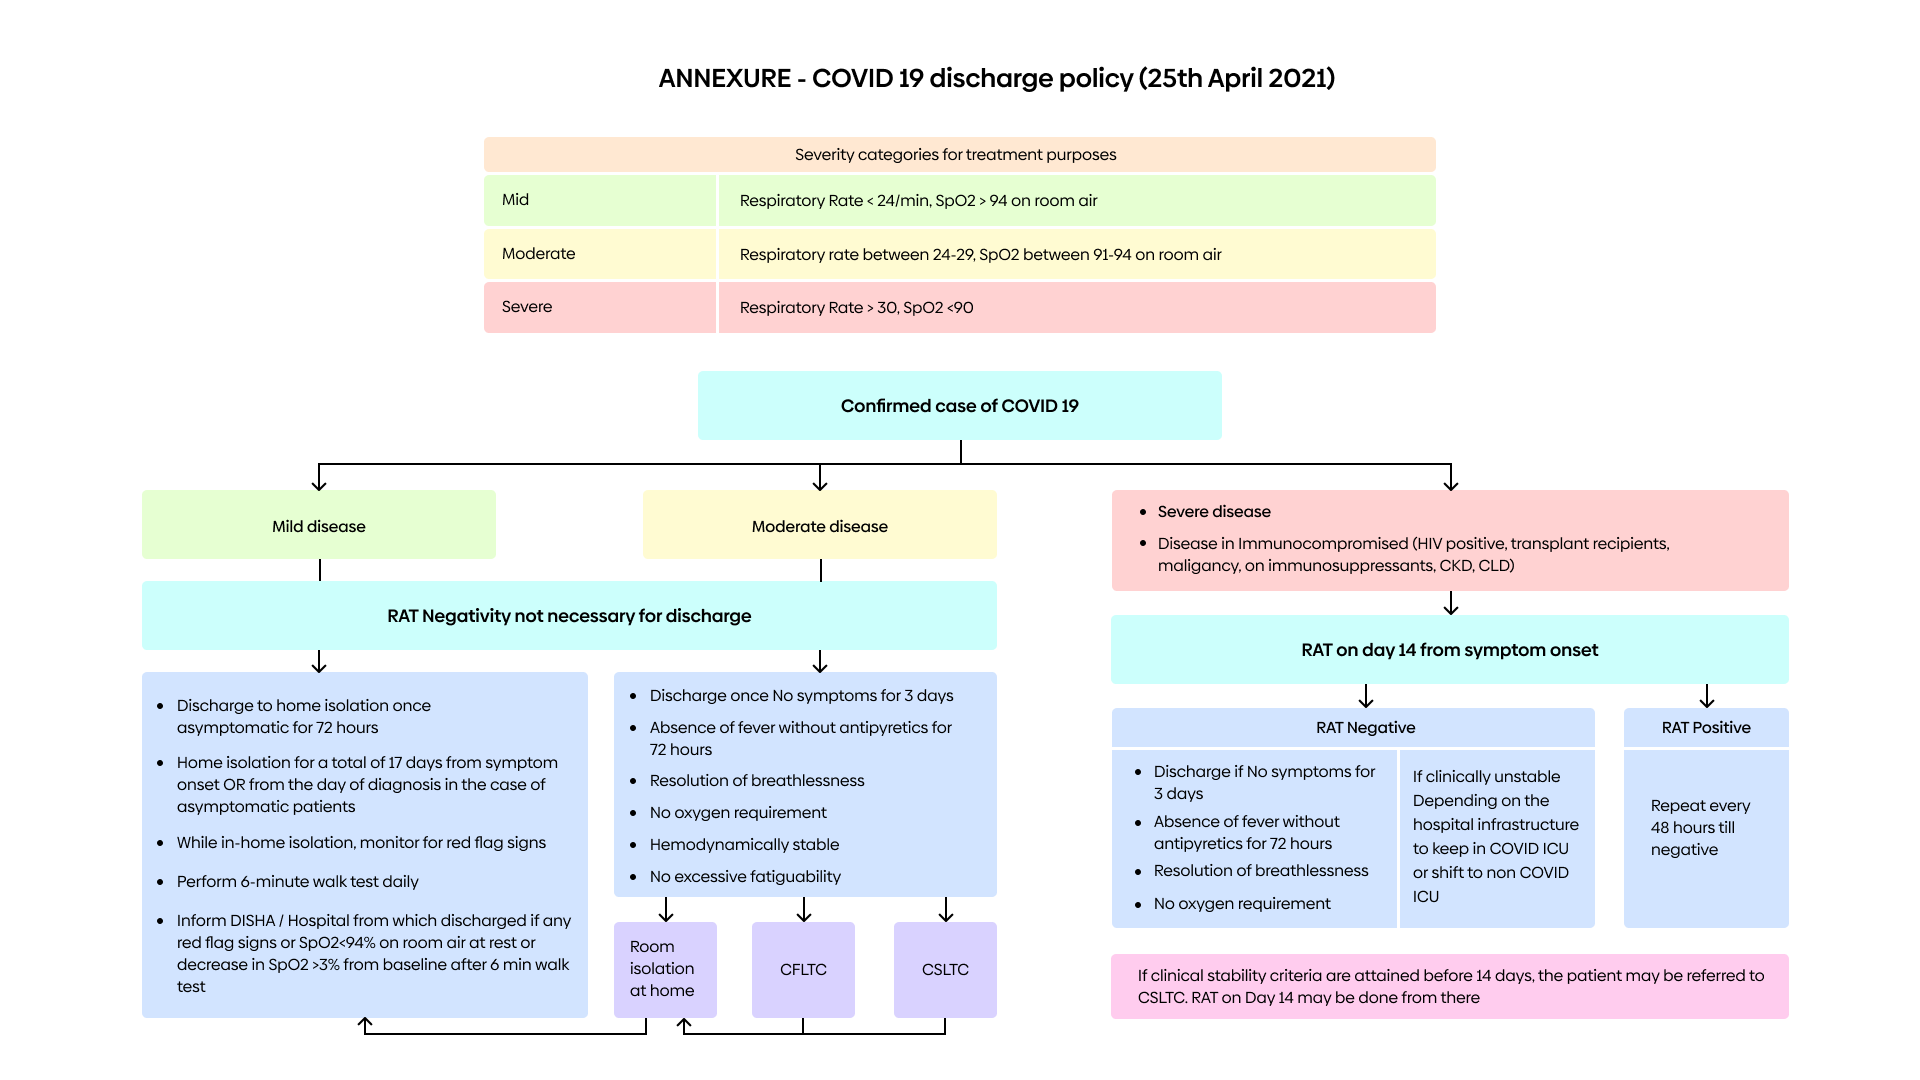 COVID-19 discharge policy